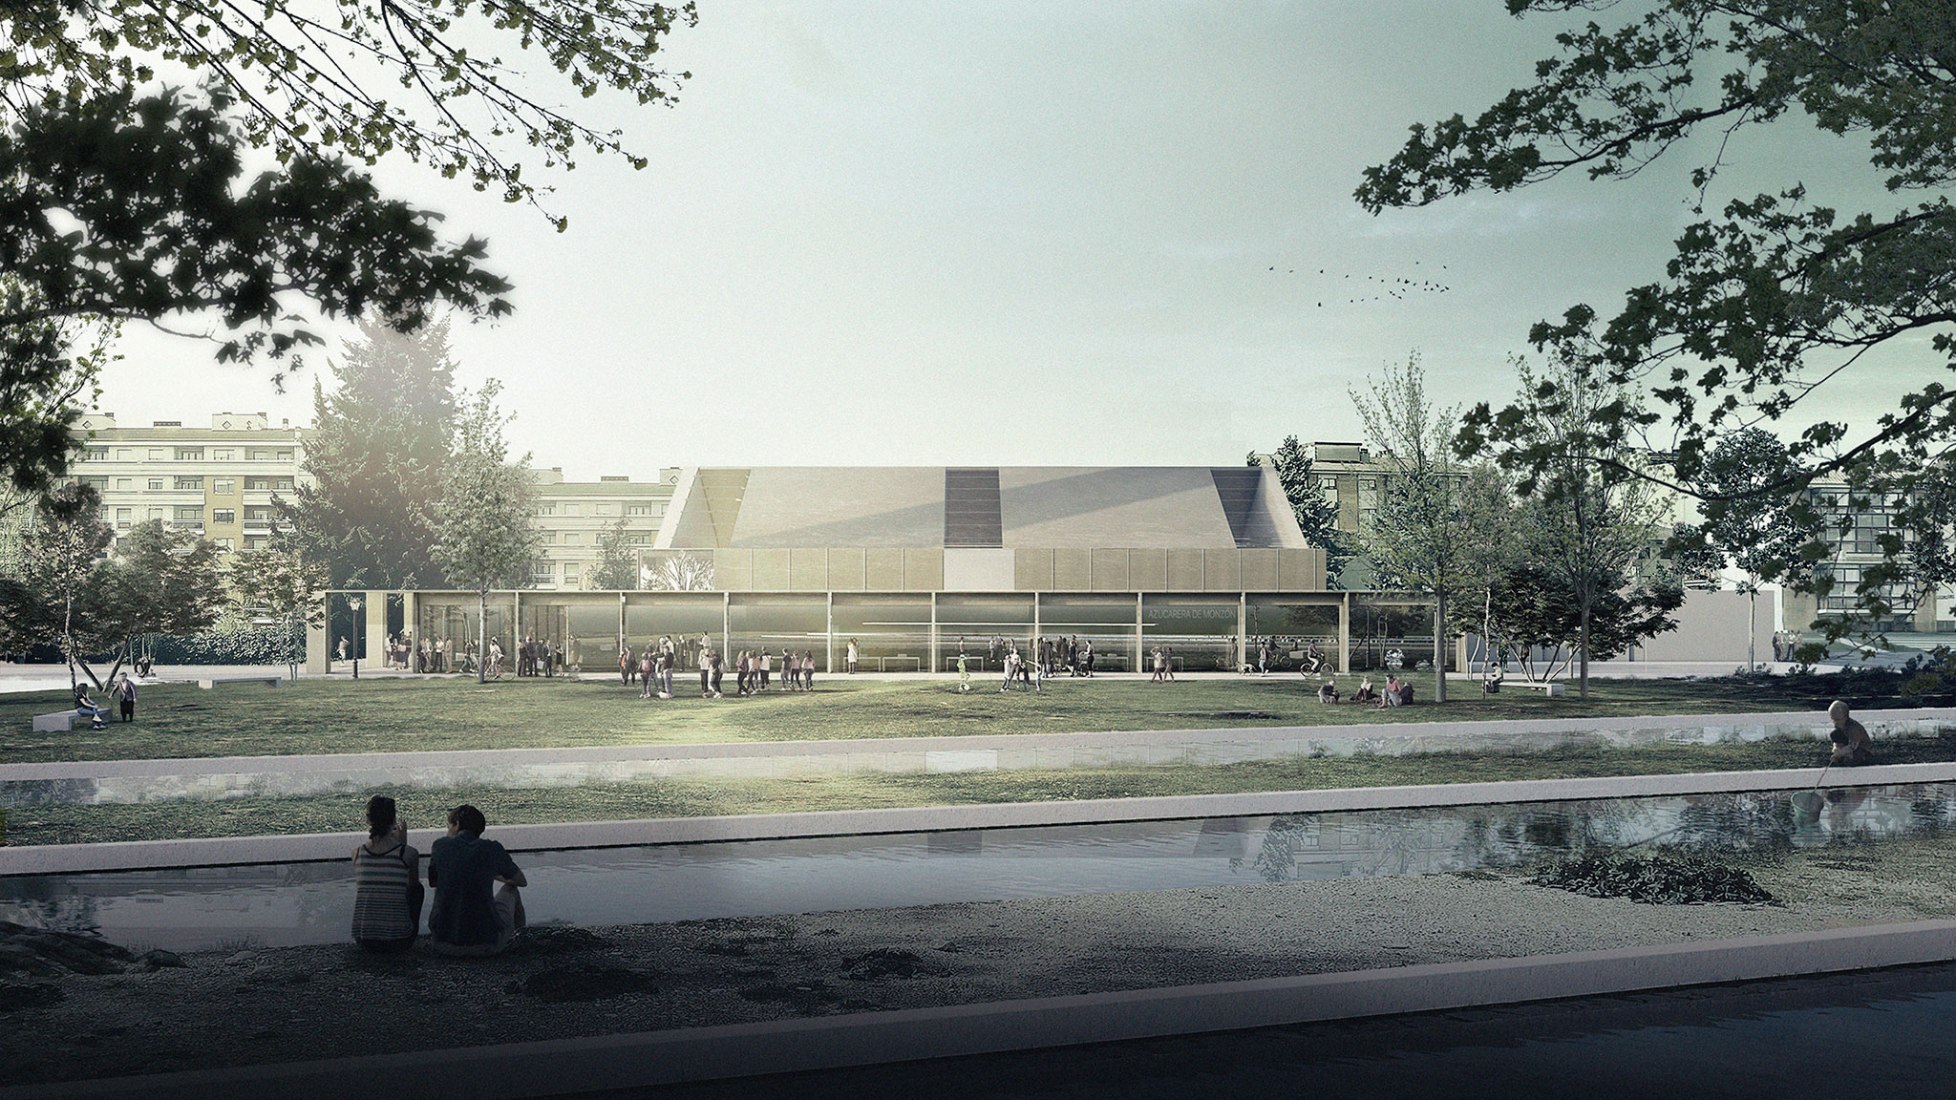 Renovation of the Pulp Warehouse by alcolea+tárrago. Visualization by alcolea+tárrago.